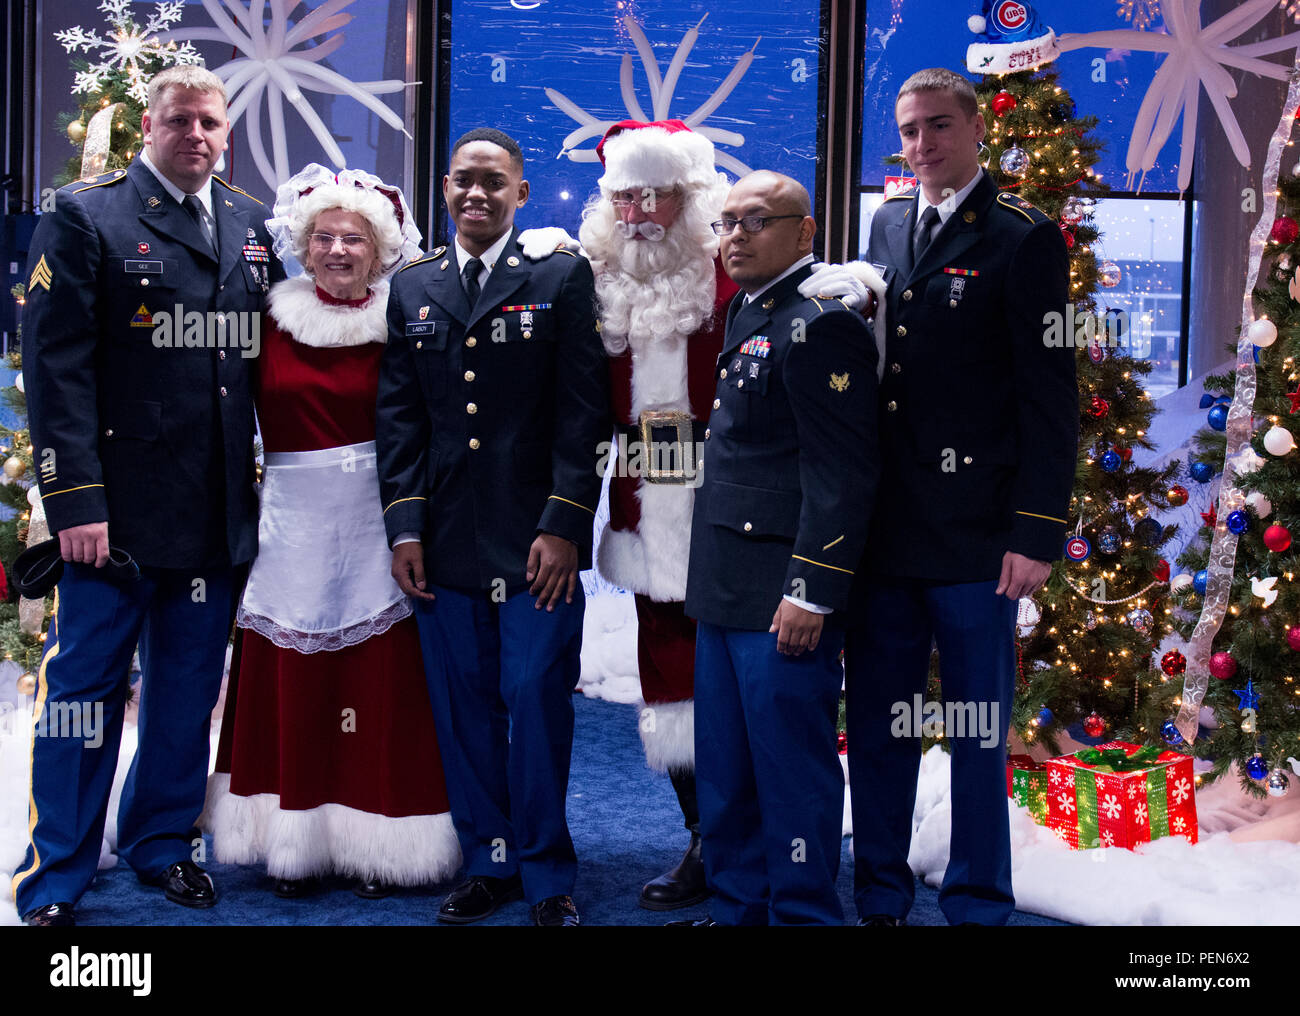 Army Reserve Soldiers from the 416th Engineer Command, Darien, Ill., pose with Santa and Mrs. Claus during the activities before the send off the families participating in the Snowball Express, minus the actual snow, Dec. 12. The program is sponsored by American Airlines, coordinating flights from 84 cities via nearly 60 chartered and commercial flights. The Snowball Express is a nonprofit organization established in 2006, providing an all-expenses-paid trip to families across the United States with a mission of bringing hope and new memories to the children of military heroes who have died wh Stock Photo